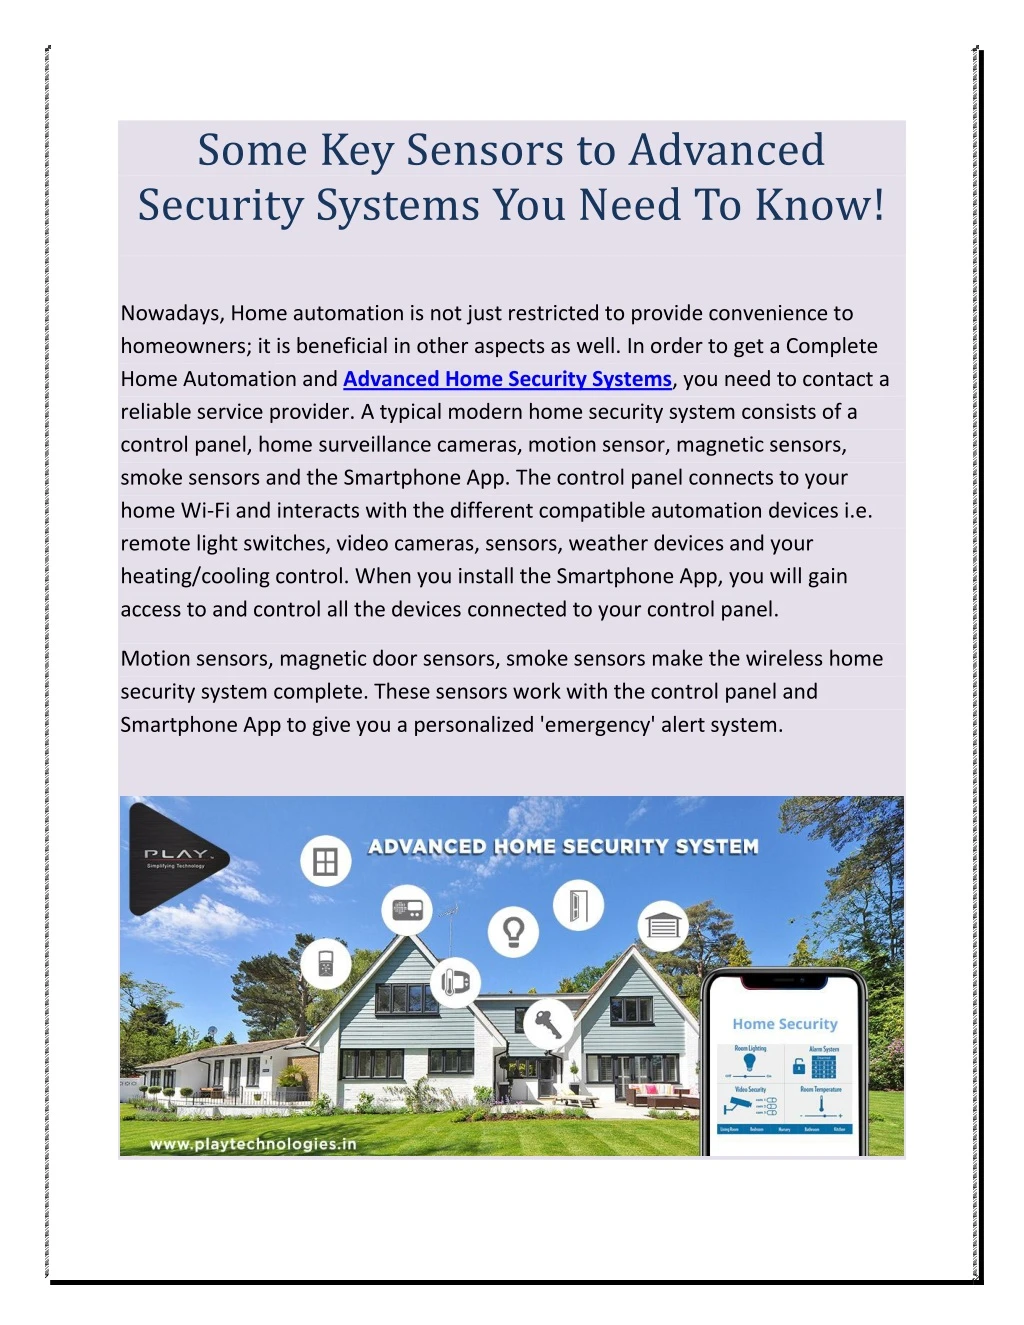 some key sensors to advanced security systems